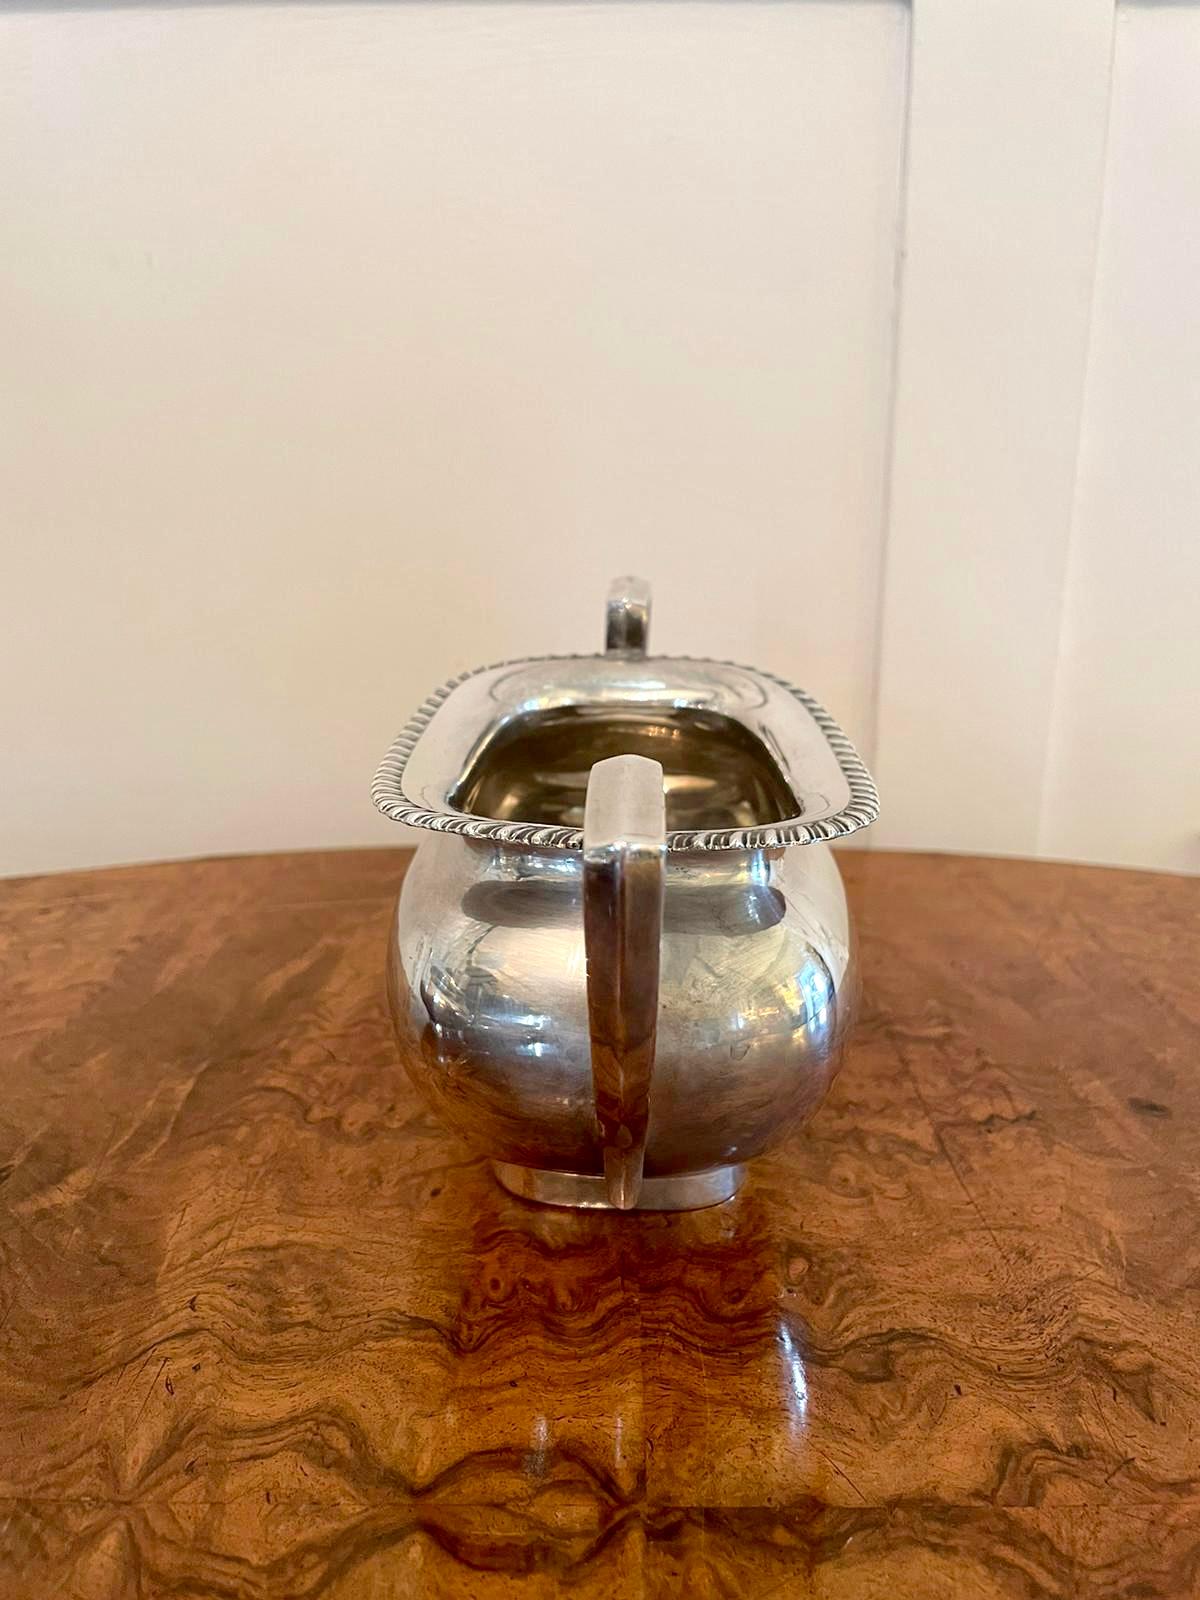 Antique Edwardian three piece silver plated tea set by Walker & Hall consisting of a teapot, sugar bowl and milk jug all with reeded edge and shaped handles. The teapot has a lift up lid and original finial.

This very attractive set is in mint